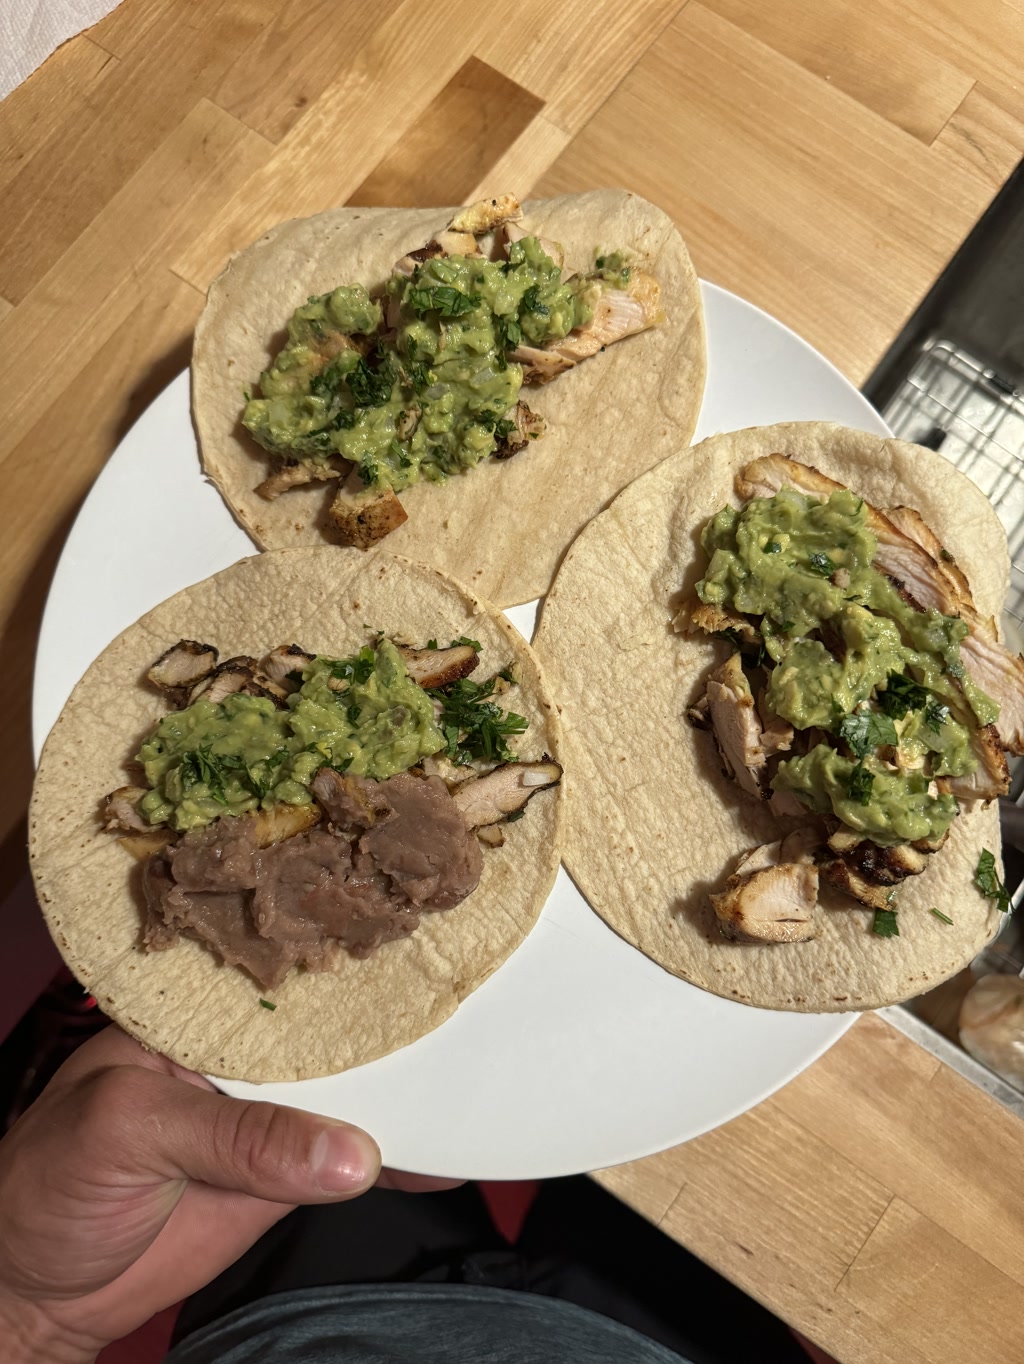 Three corn tortillas are topped with various ingredients. The first one has a layer of refried beans adjacent to some chopped herbs. The second and third tortillas are filled with grilled chicken pieces topped with a generous portion of chunky green salsa or guacamole. All are positioned on a white plate, which is being held by a person with visible fingers and a thumb. The plate rests on a wooden surface partially lit by sunlight, indicating either outdoor dining or the presence of a window nearby.